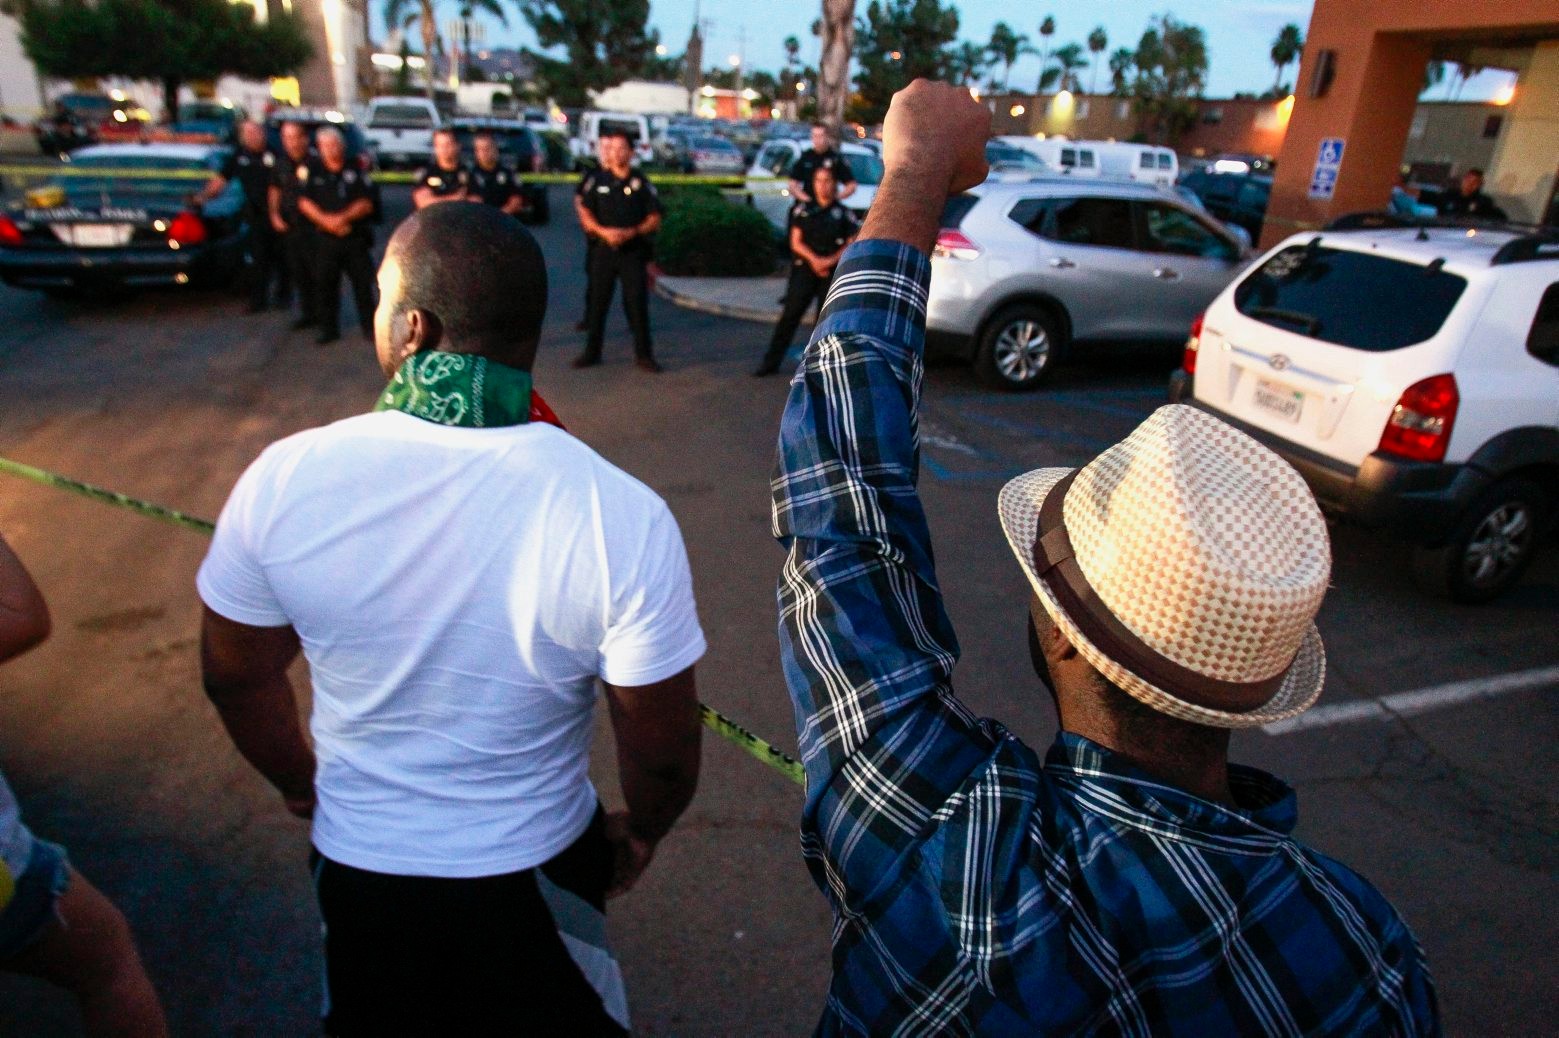 One man holds his fist up as others yell at police at the scene where a black man was shot by police earlier in El Cajon, east of San Diego, Calif., Tuesday, Sept. 27, 2016. (Hayne Palmour IV/The San Diego Union-Tribune via AP) APTOPIX California Police Shooting